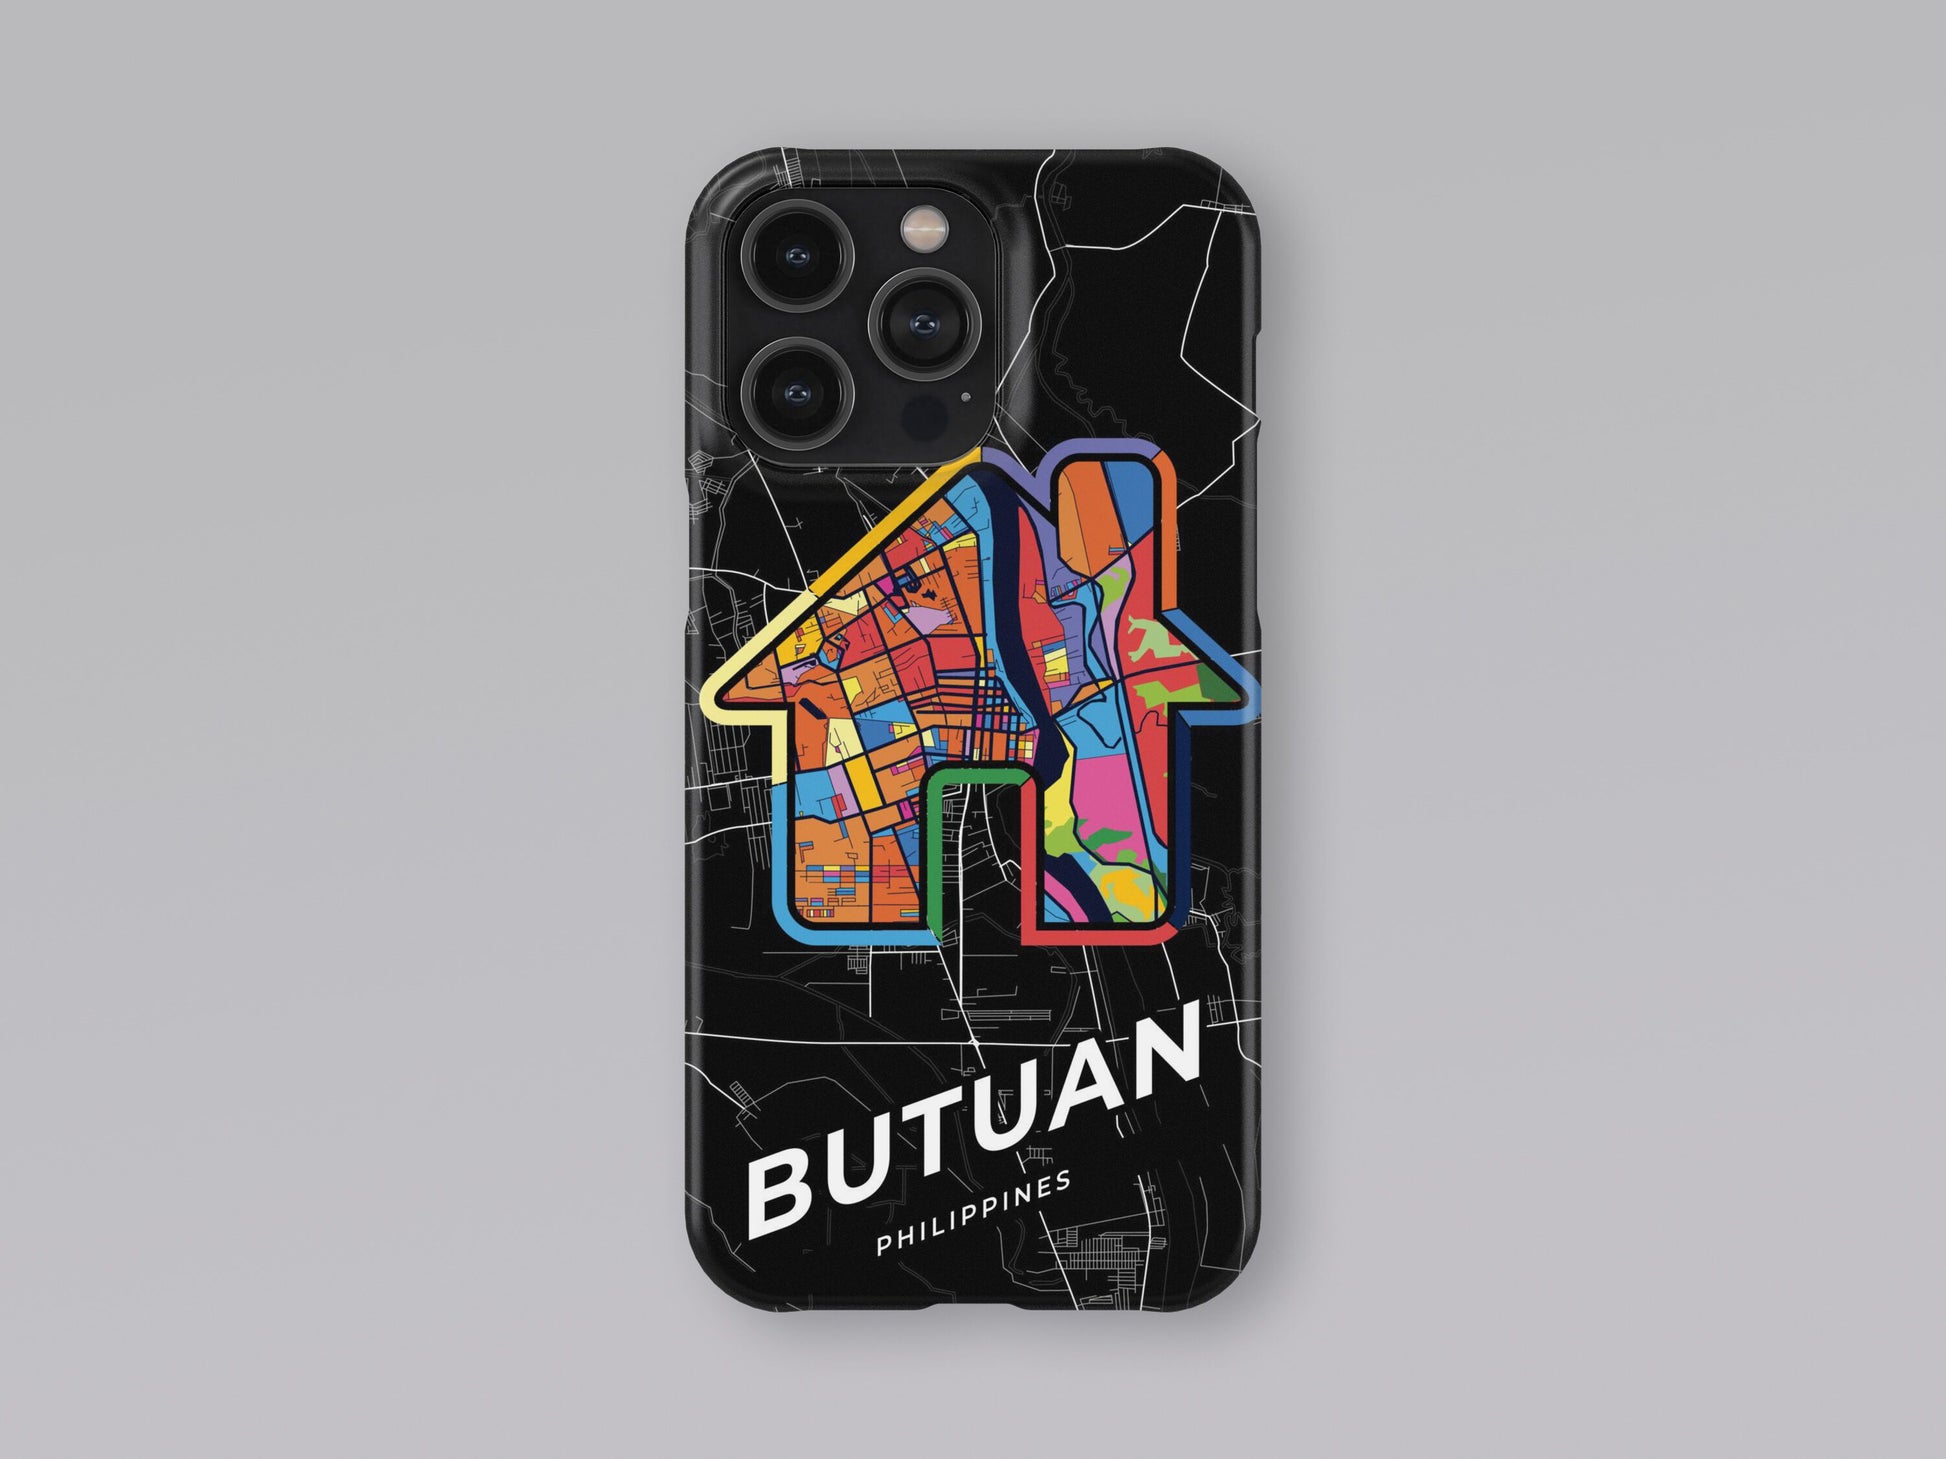 Butuan Philippines slim phone case with colorful icon. Birthday, wedding or housewarming gift. Couple match cases. 3